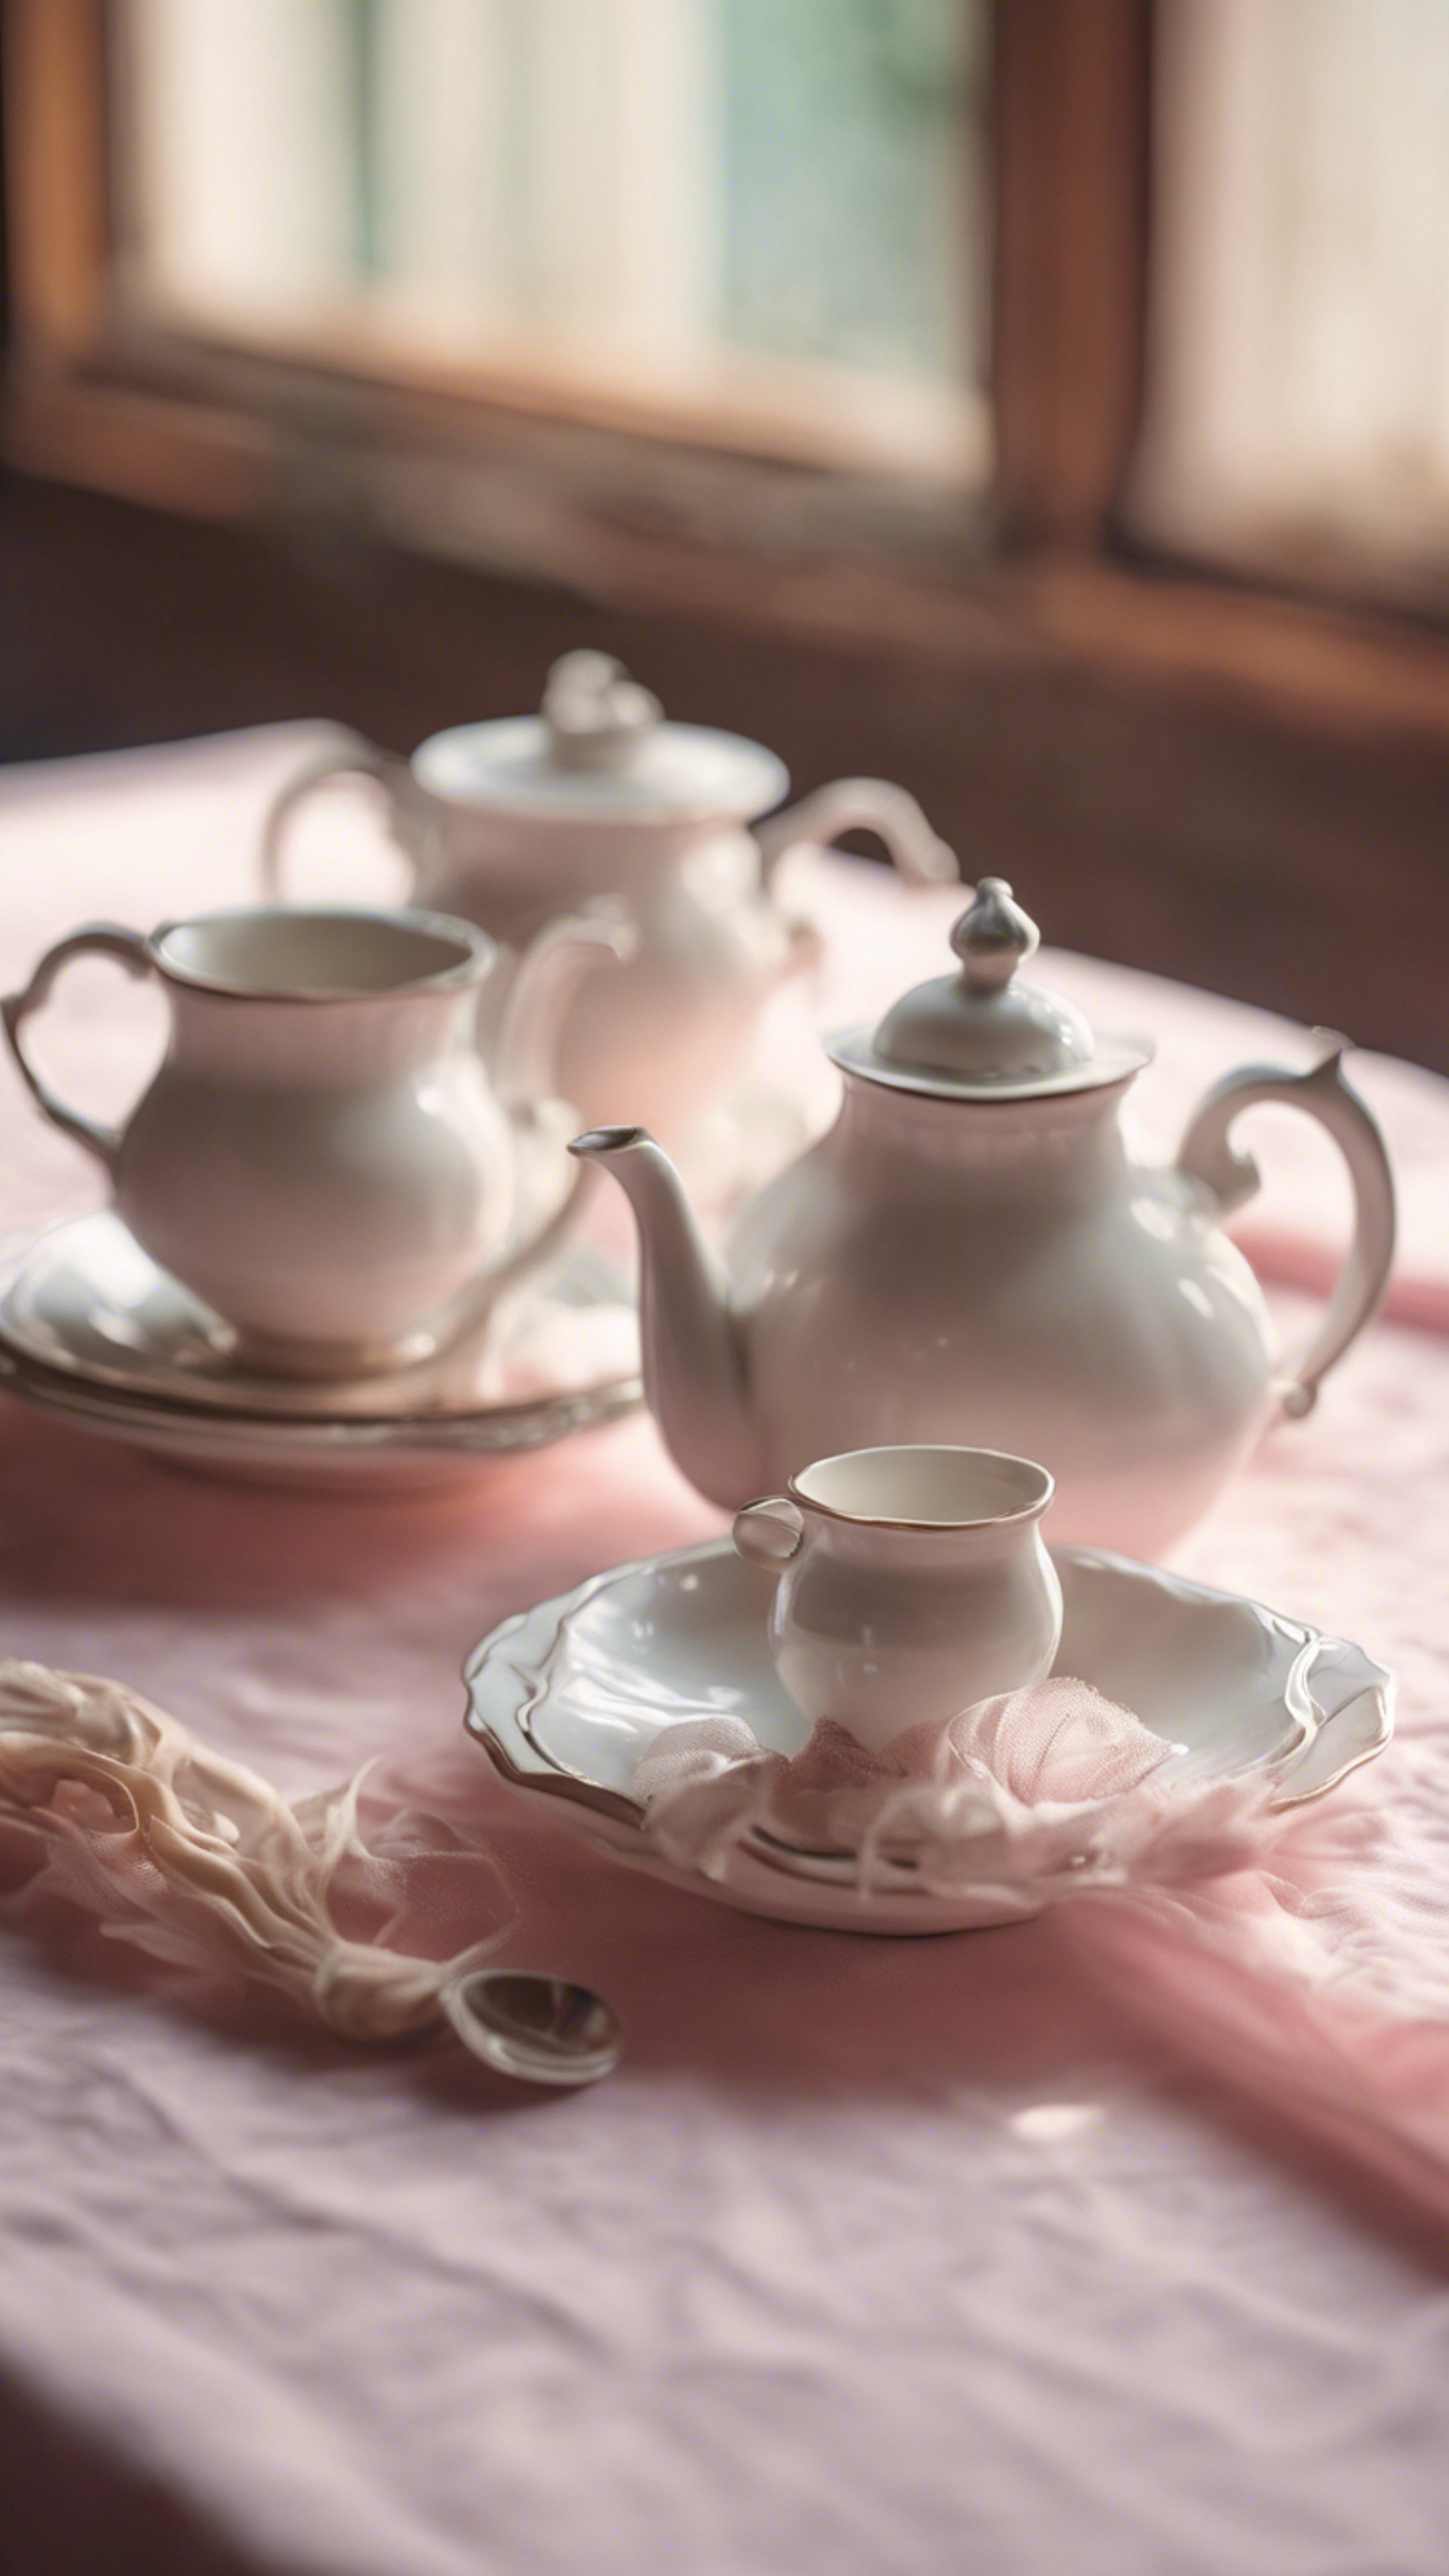 A vintage white tea set, arranged on a fluffy pastel pink tablecloth in a charming, old-world kitchen. Tapeet[519305883ddb44018966]